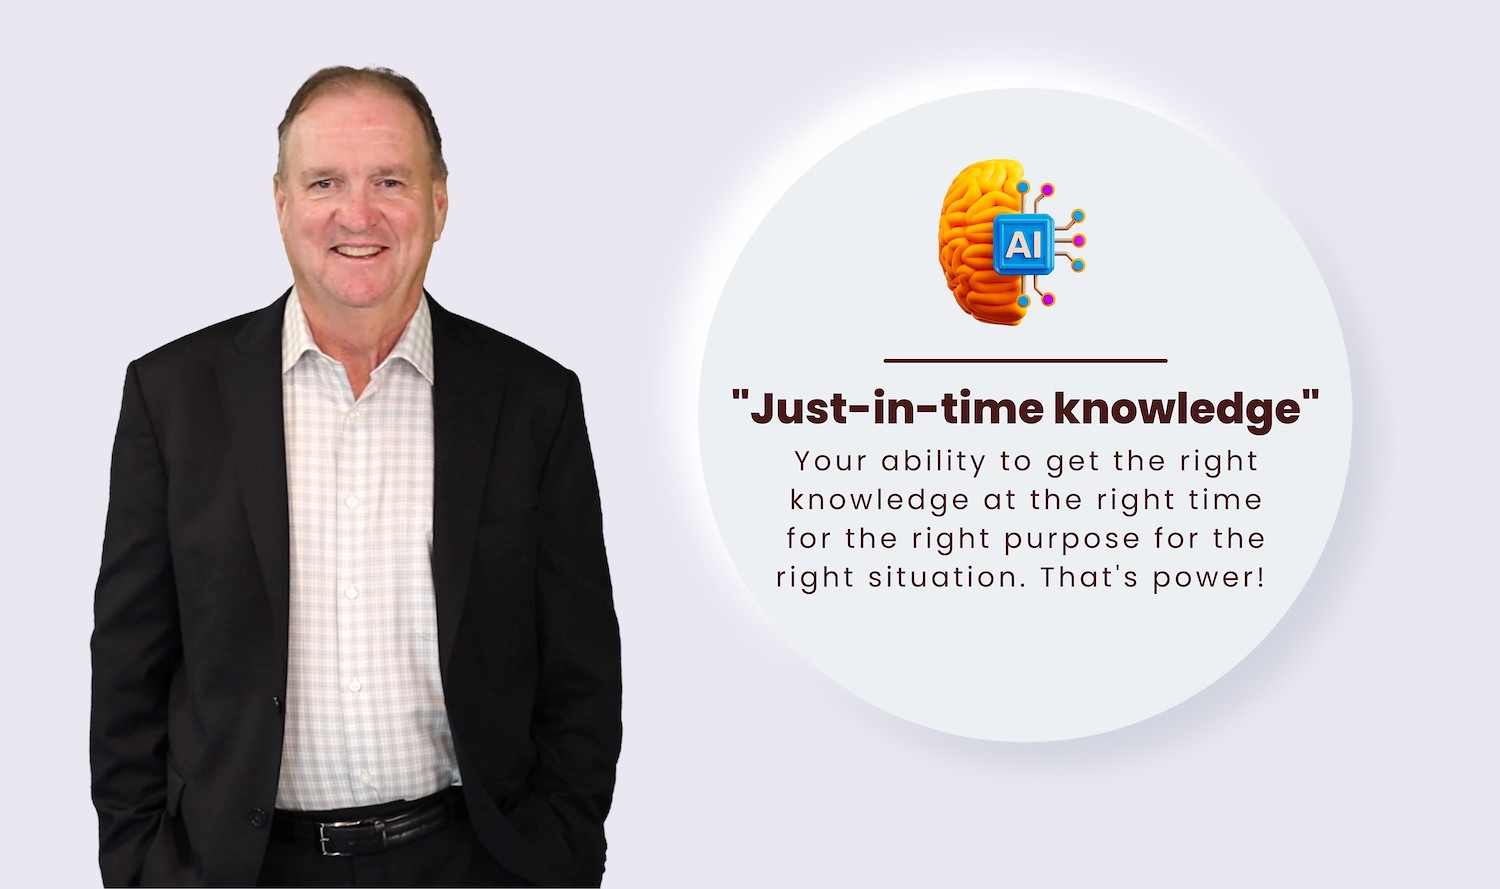 "'Just-in-time knowledge' - Your ability to get the right knowledge at the right time for the right purpose for the right situation. That's power!" - Futurist Jim Carroll